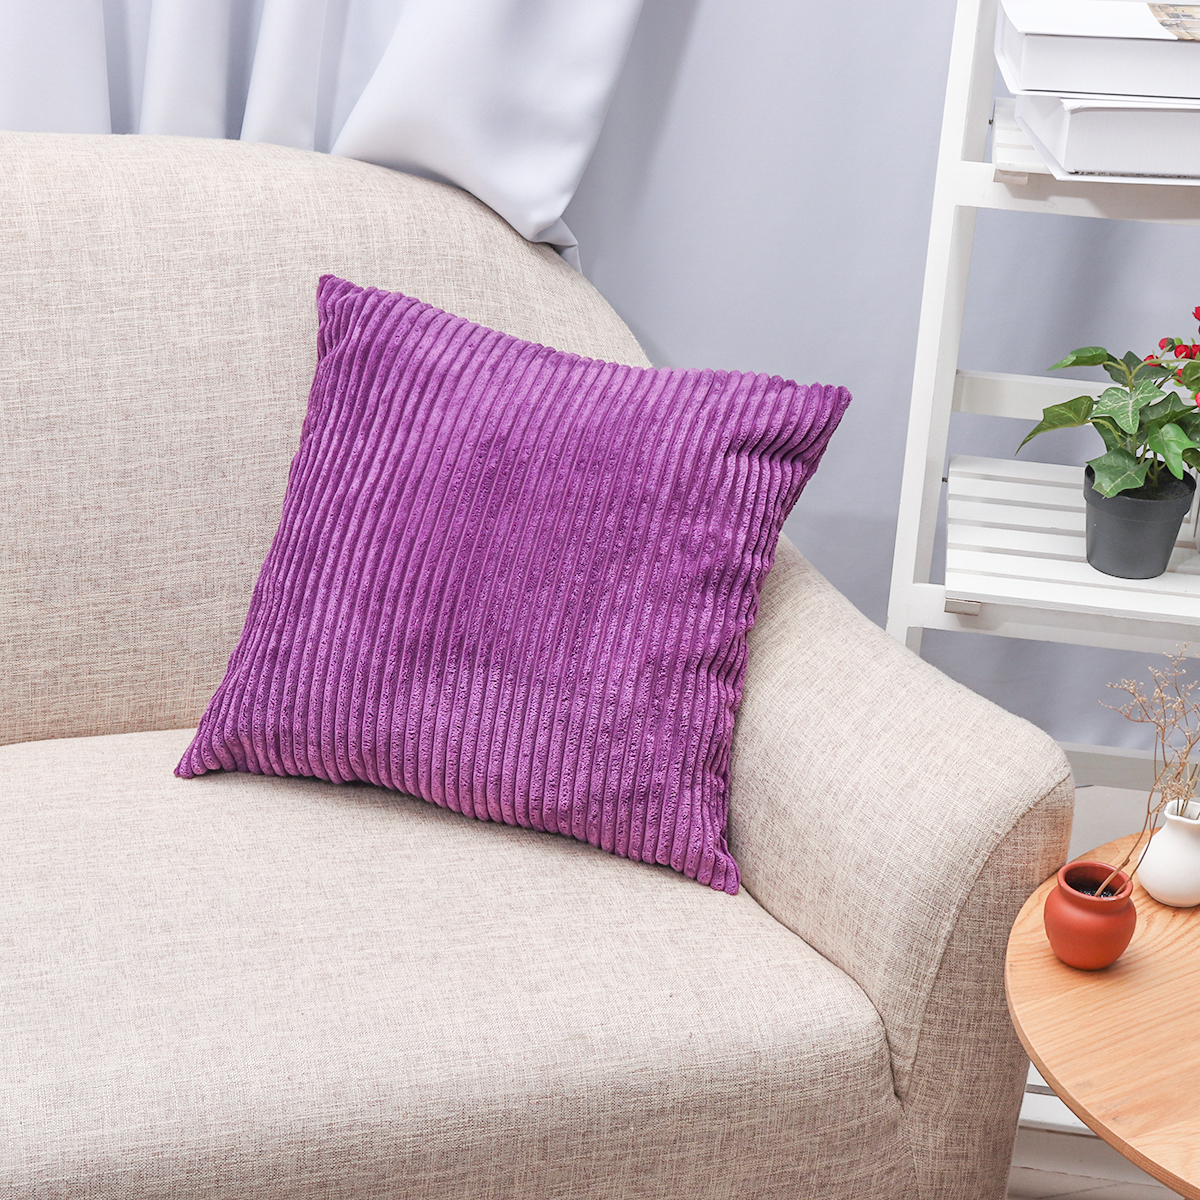 45X45cm-Corduroy-Pillow-Case-Colorful-Cushion-Cover-Throw-Home-Sofa-Decorations-1518541-6